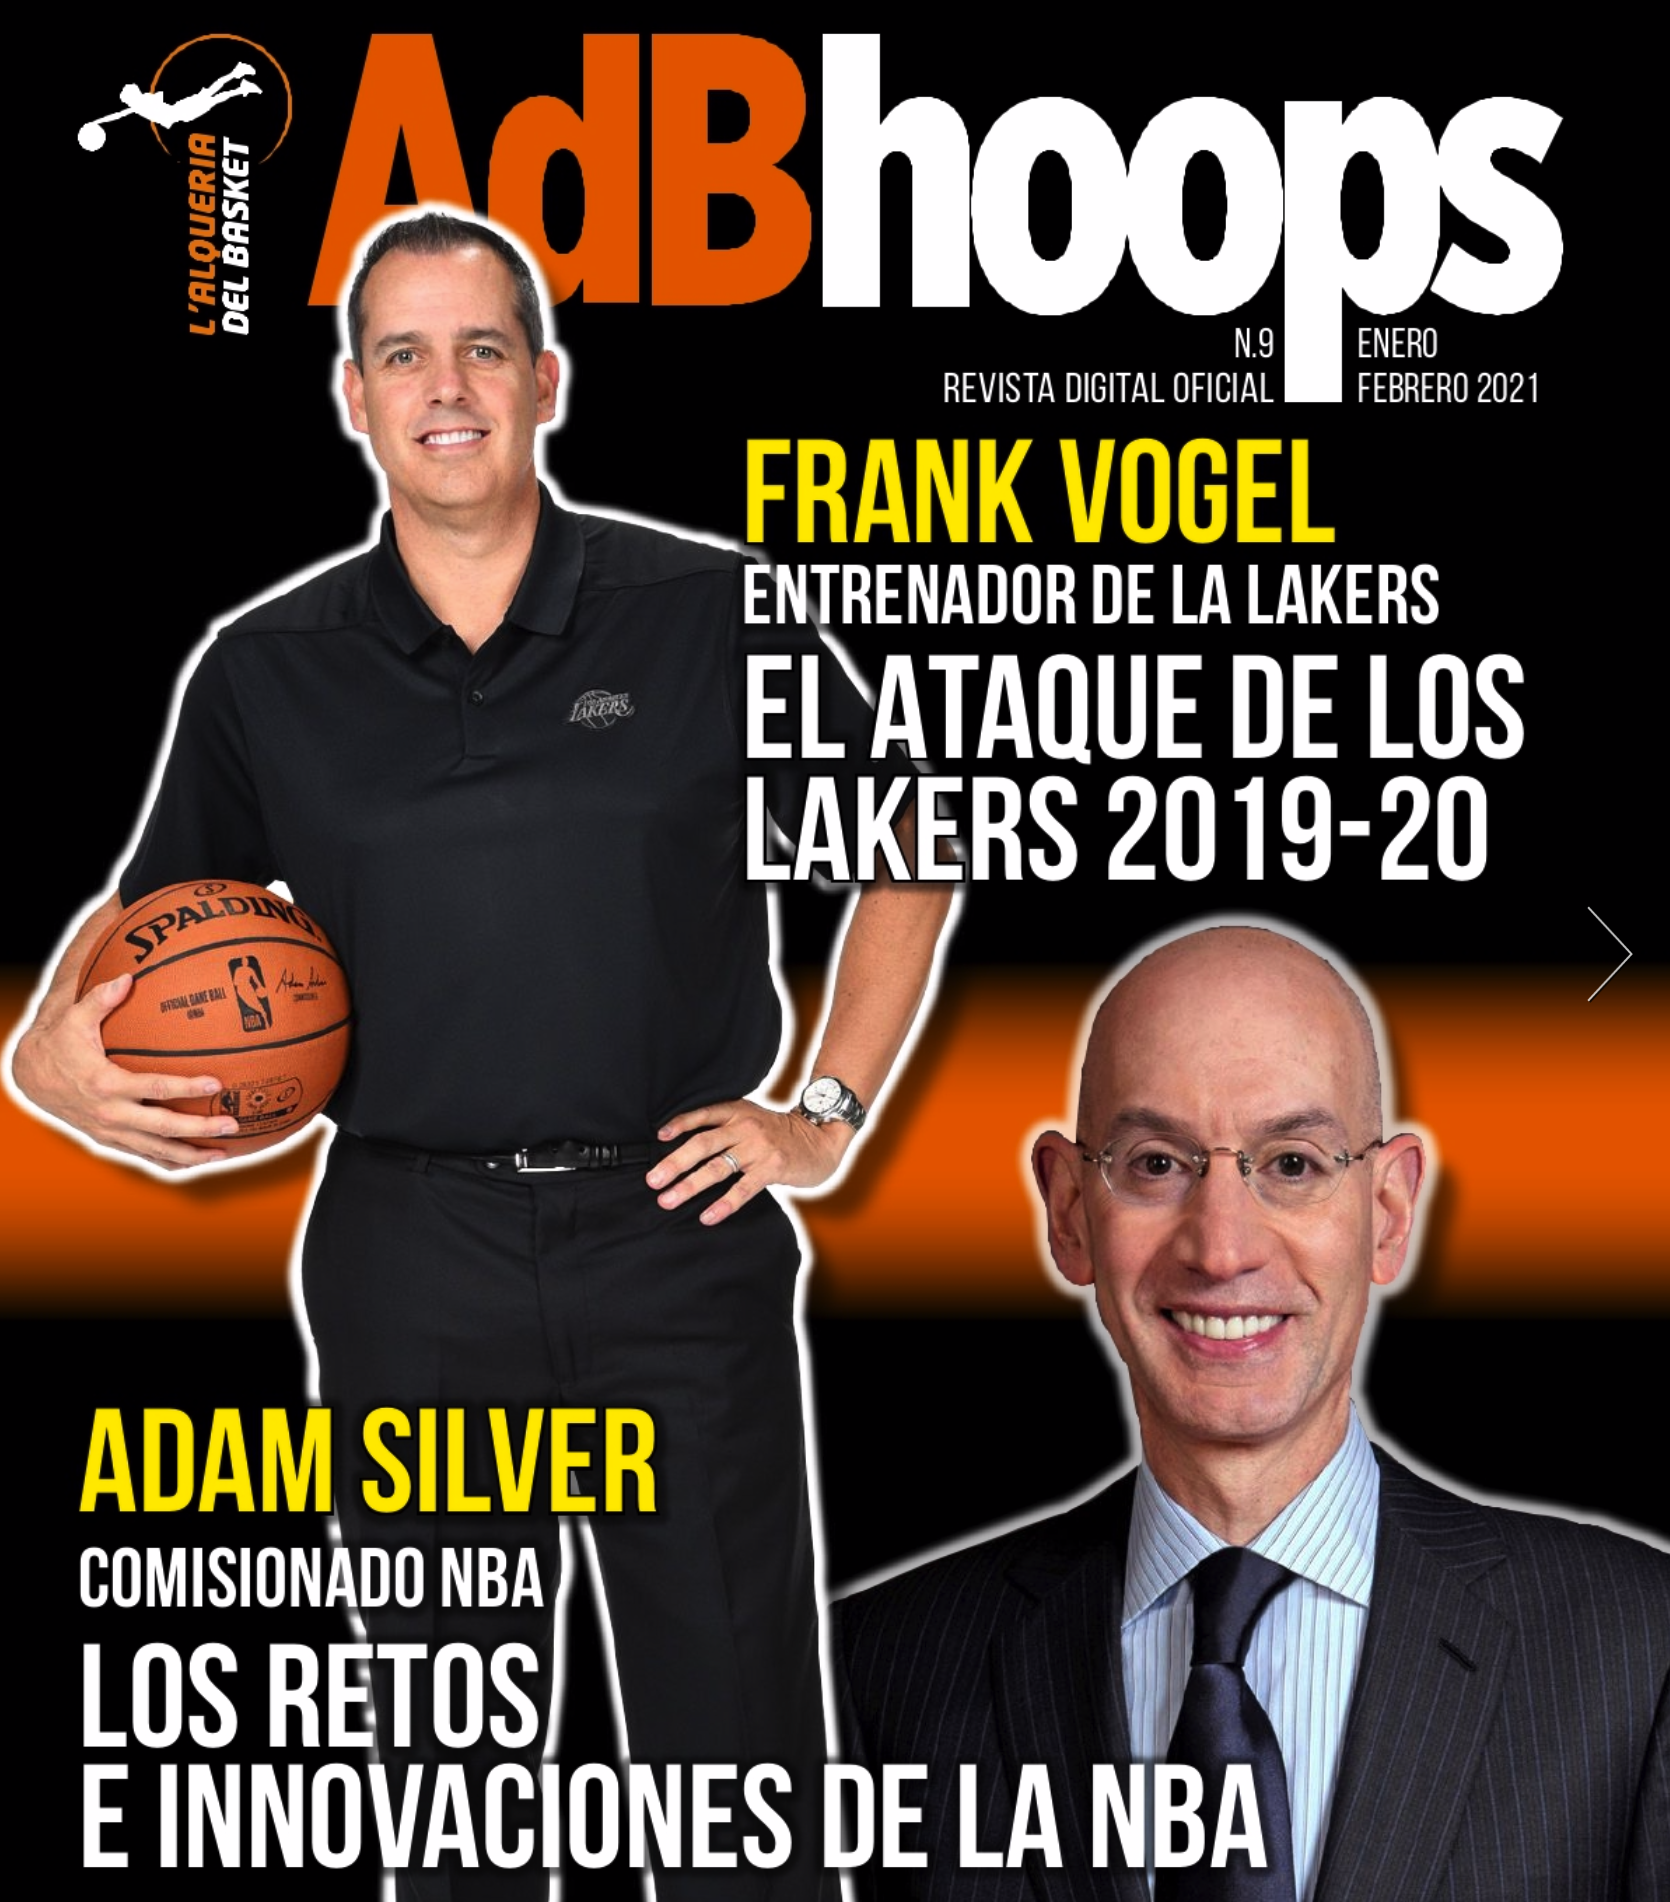 Rising Coaches is Featured in AdB Hoops Magazine